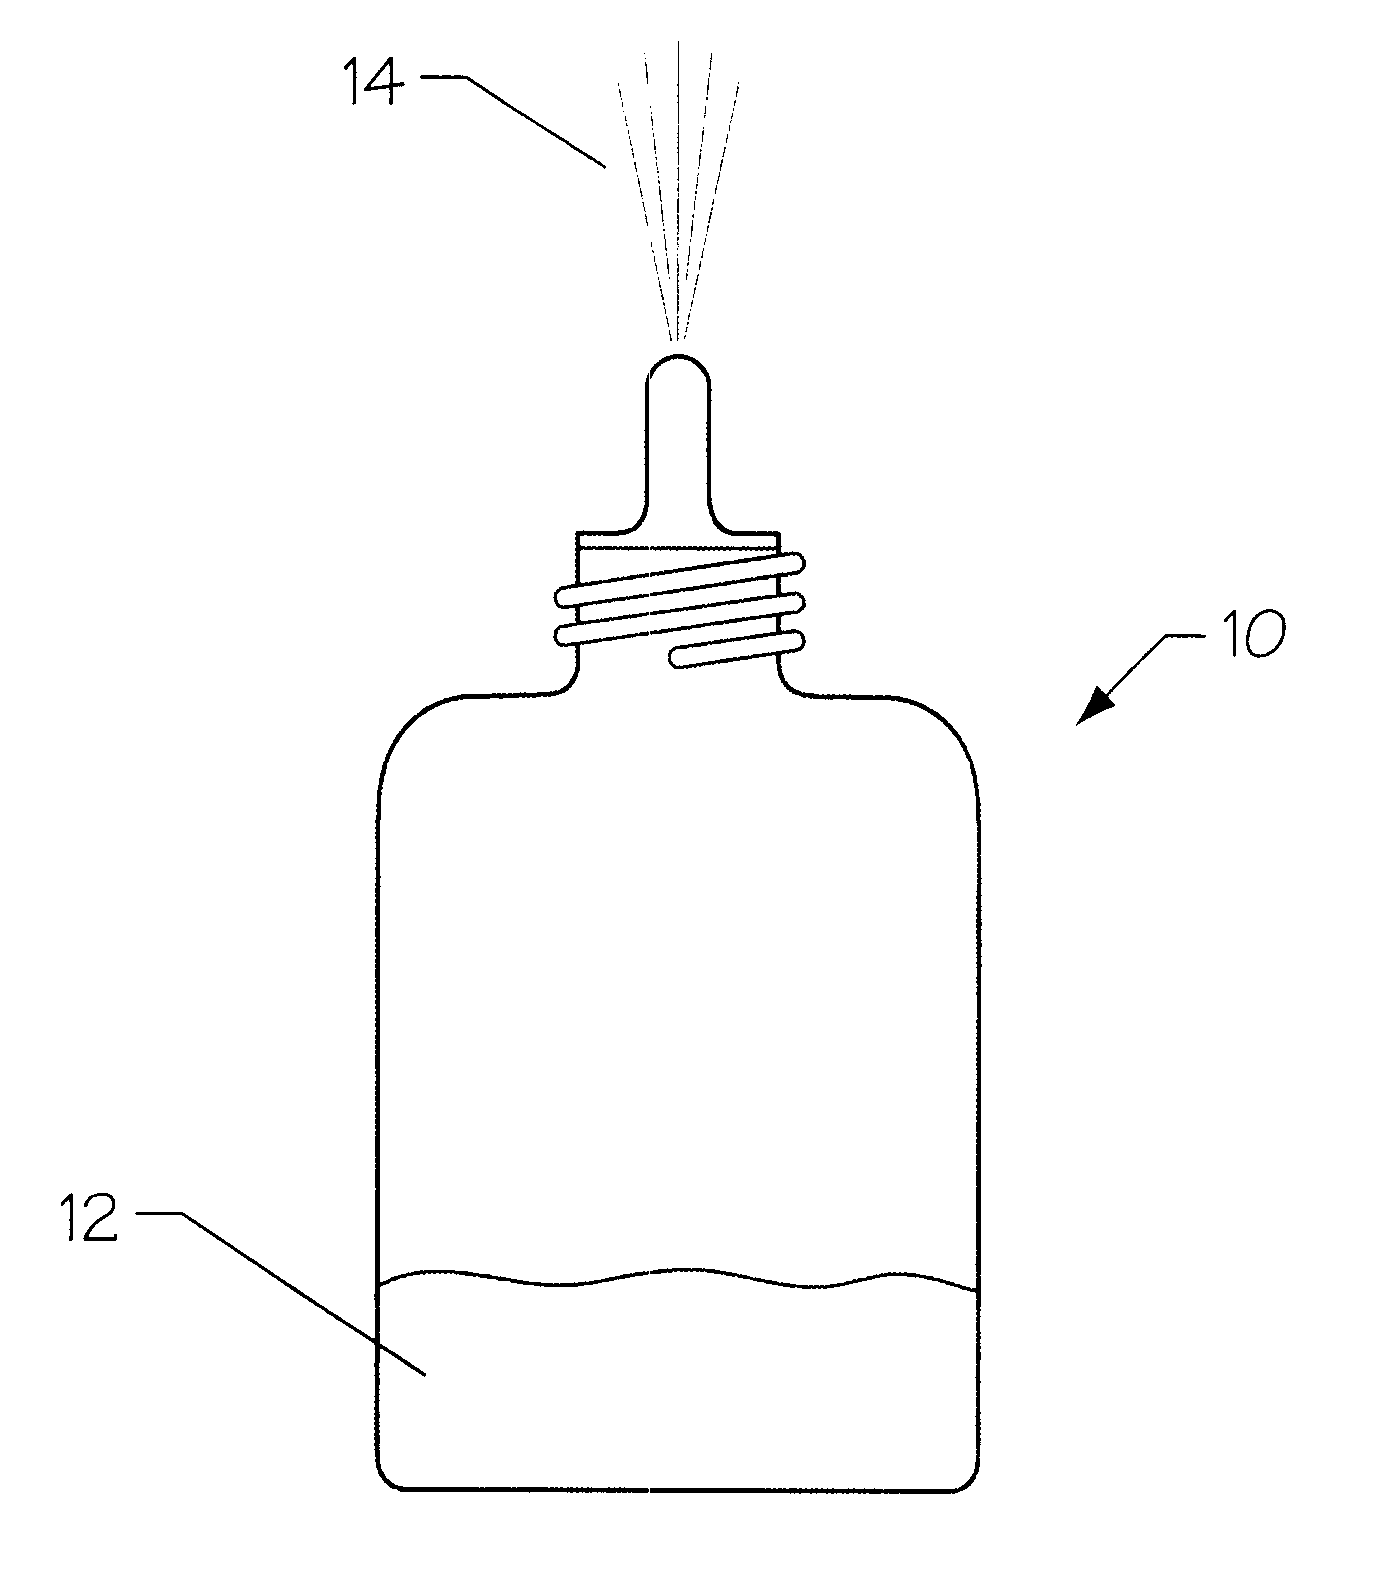 Respiratory infection treatment device